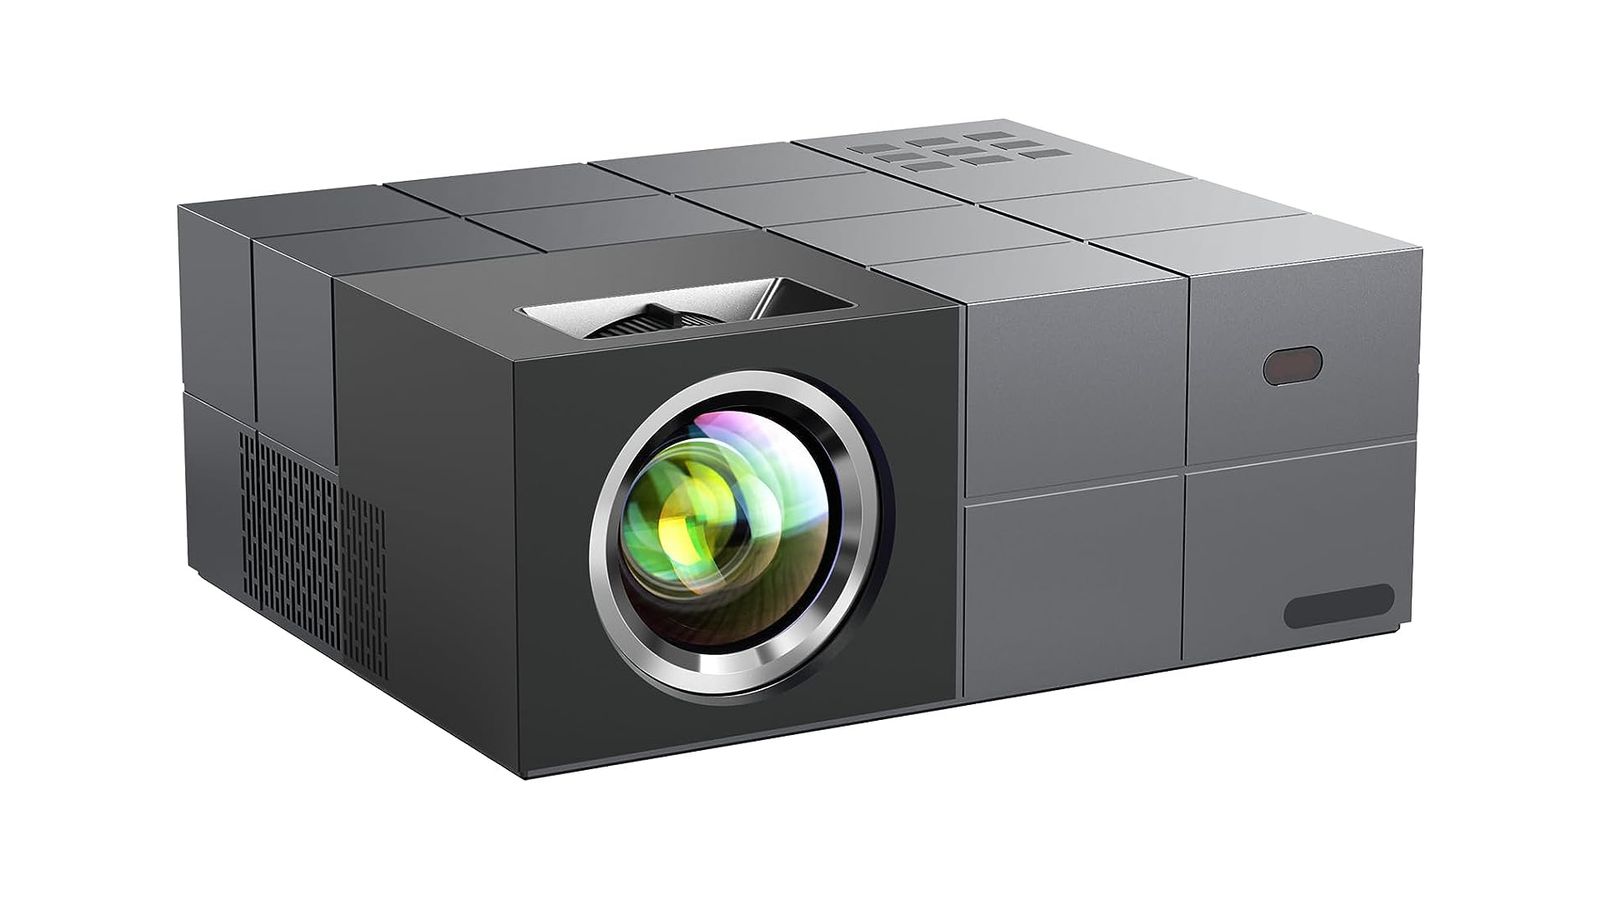 YOWHICK GDP1G product image of a grey box-shaped projector with the lens on the right side.